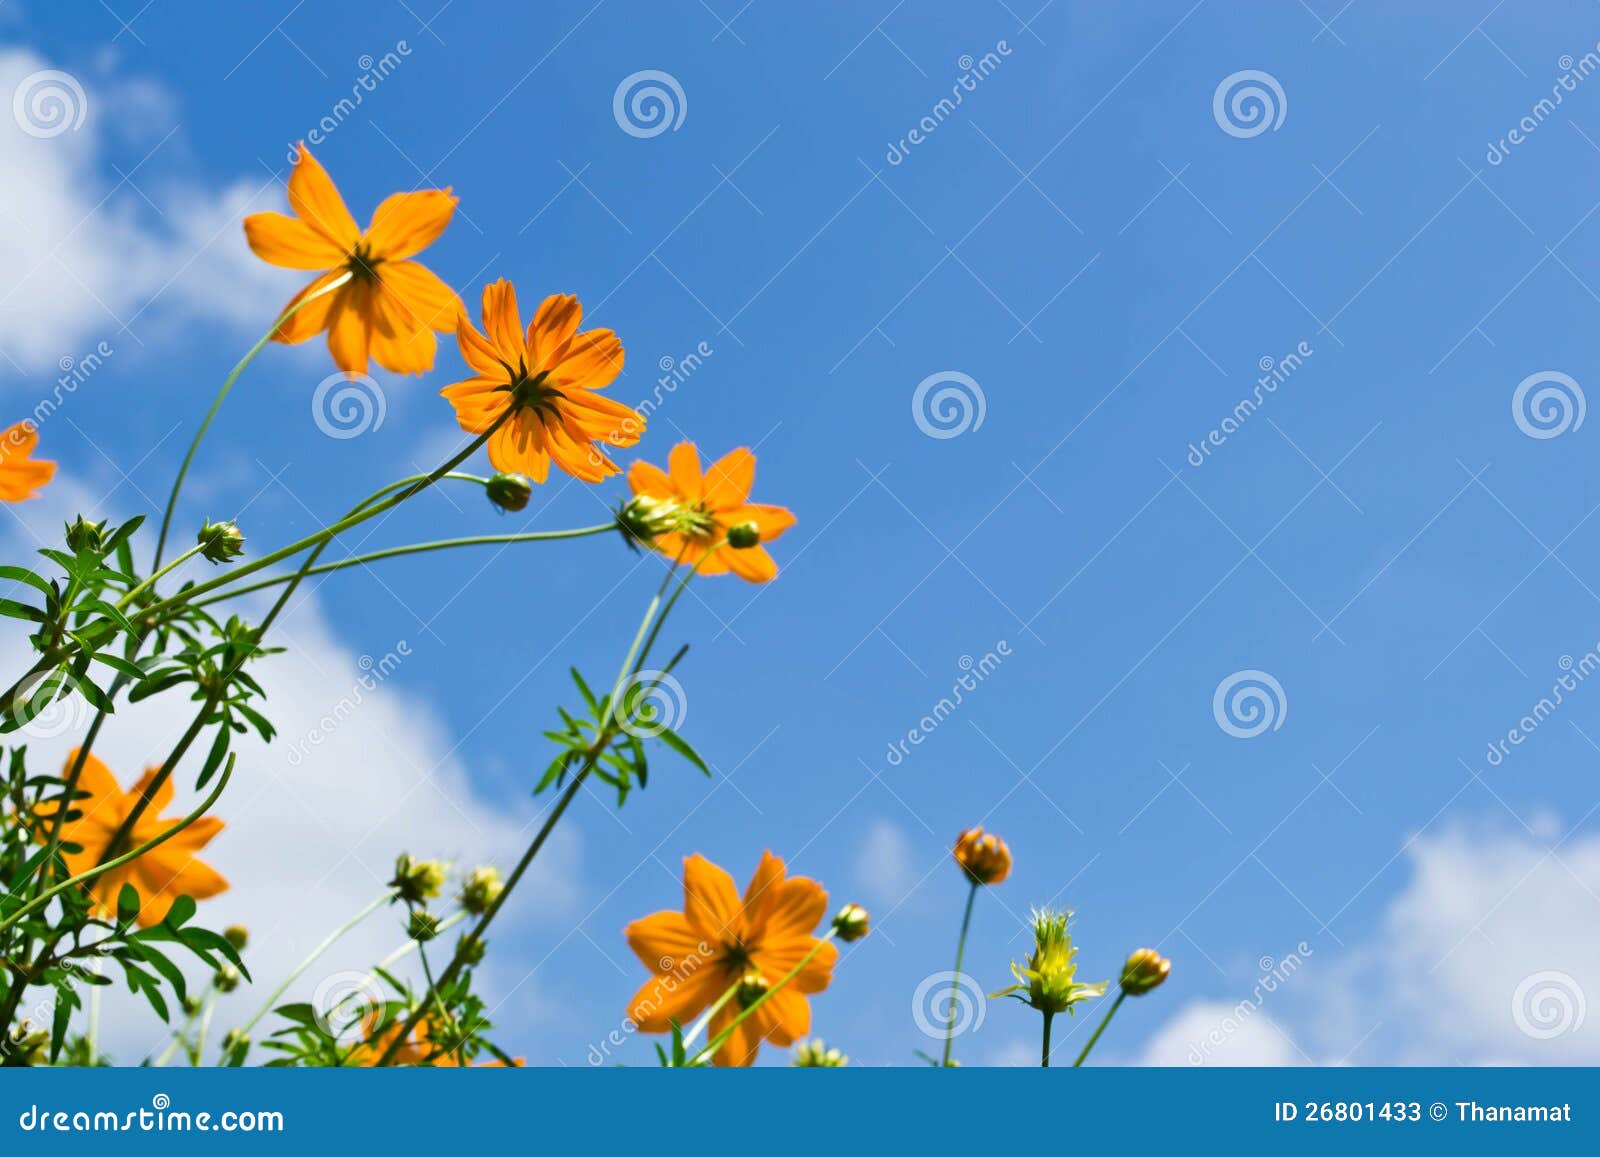 Flower background and sky stock image. Image of color - 26801433